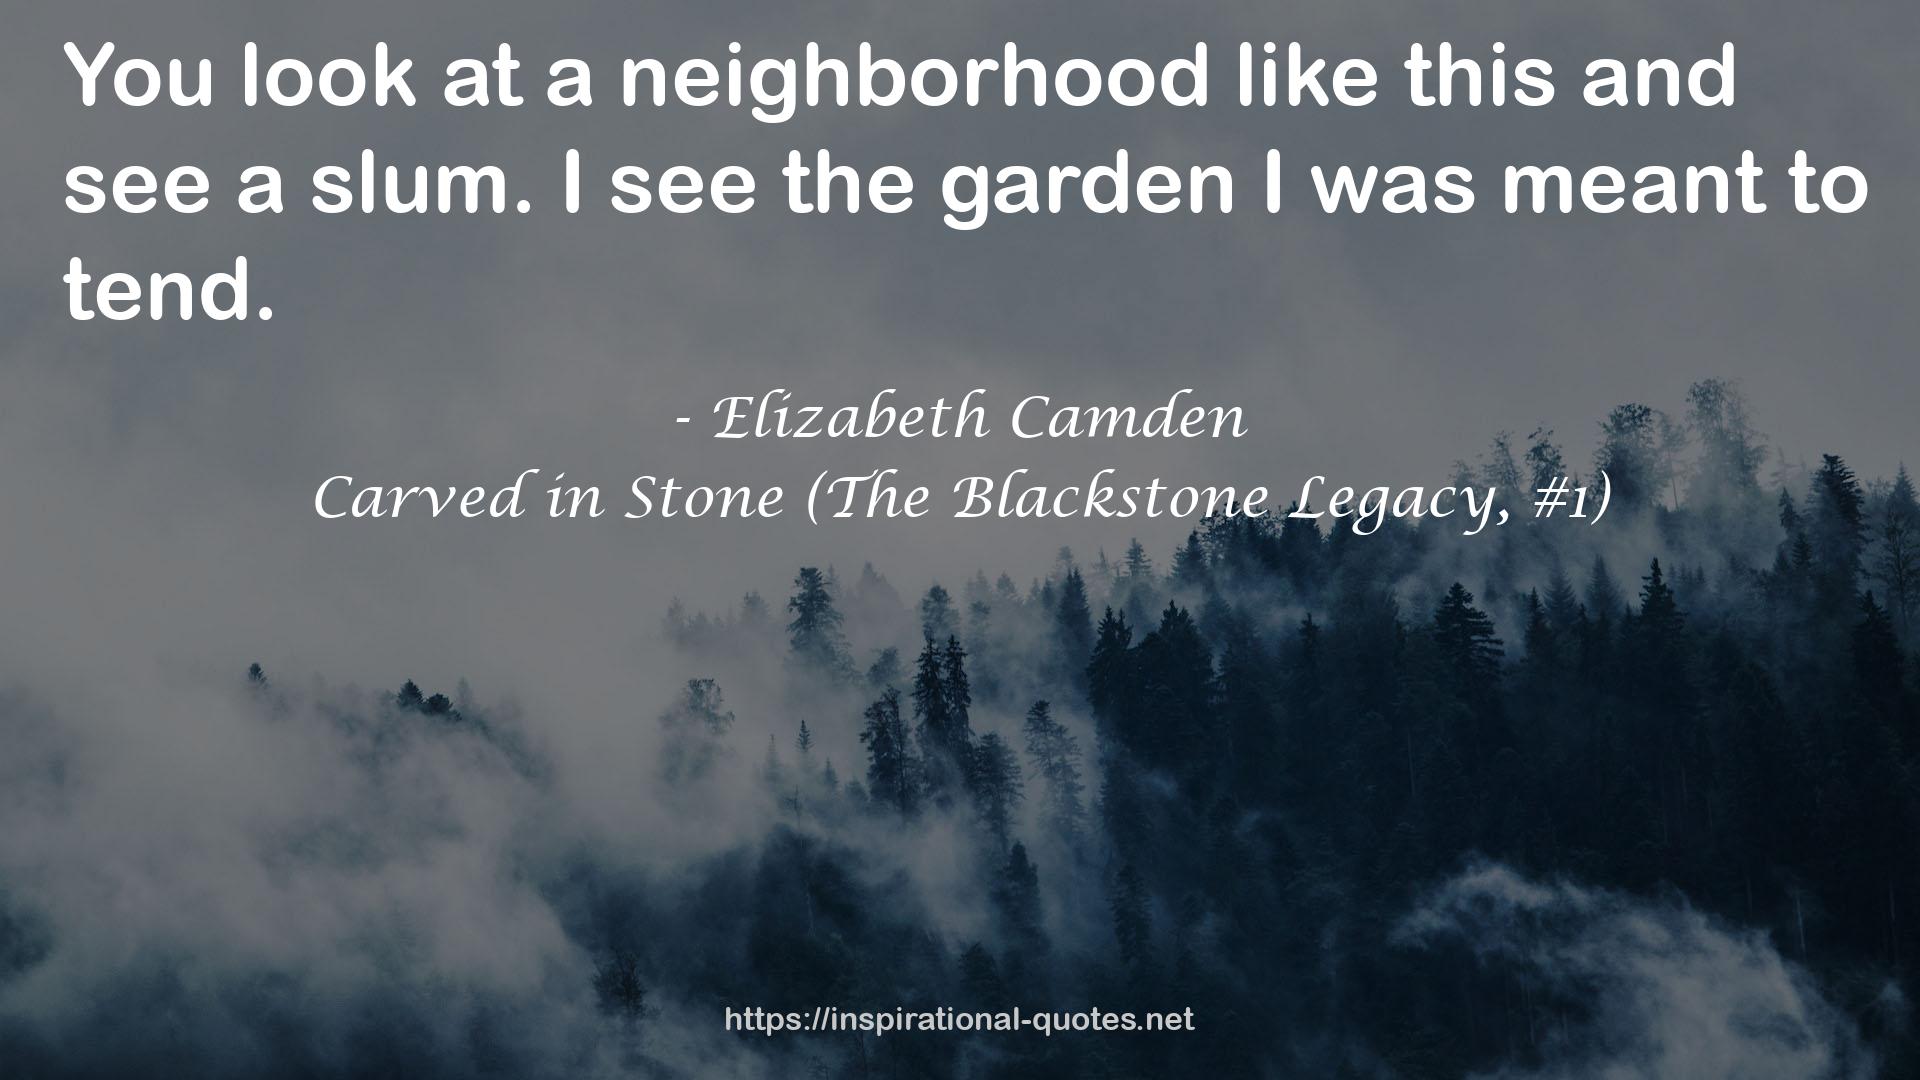 Carved in Stone (The Blackstone Legacy, #1) QUOTES